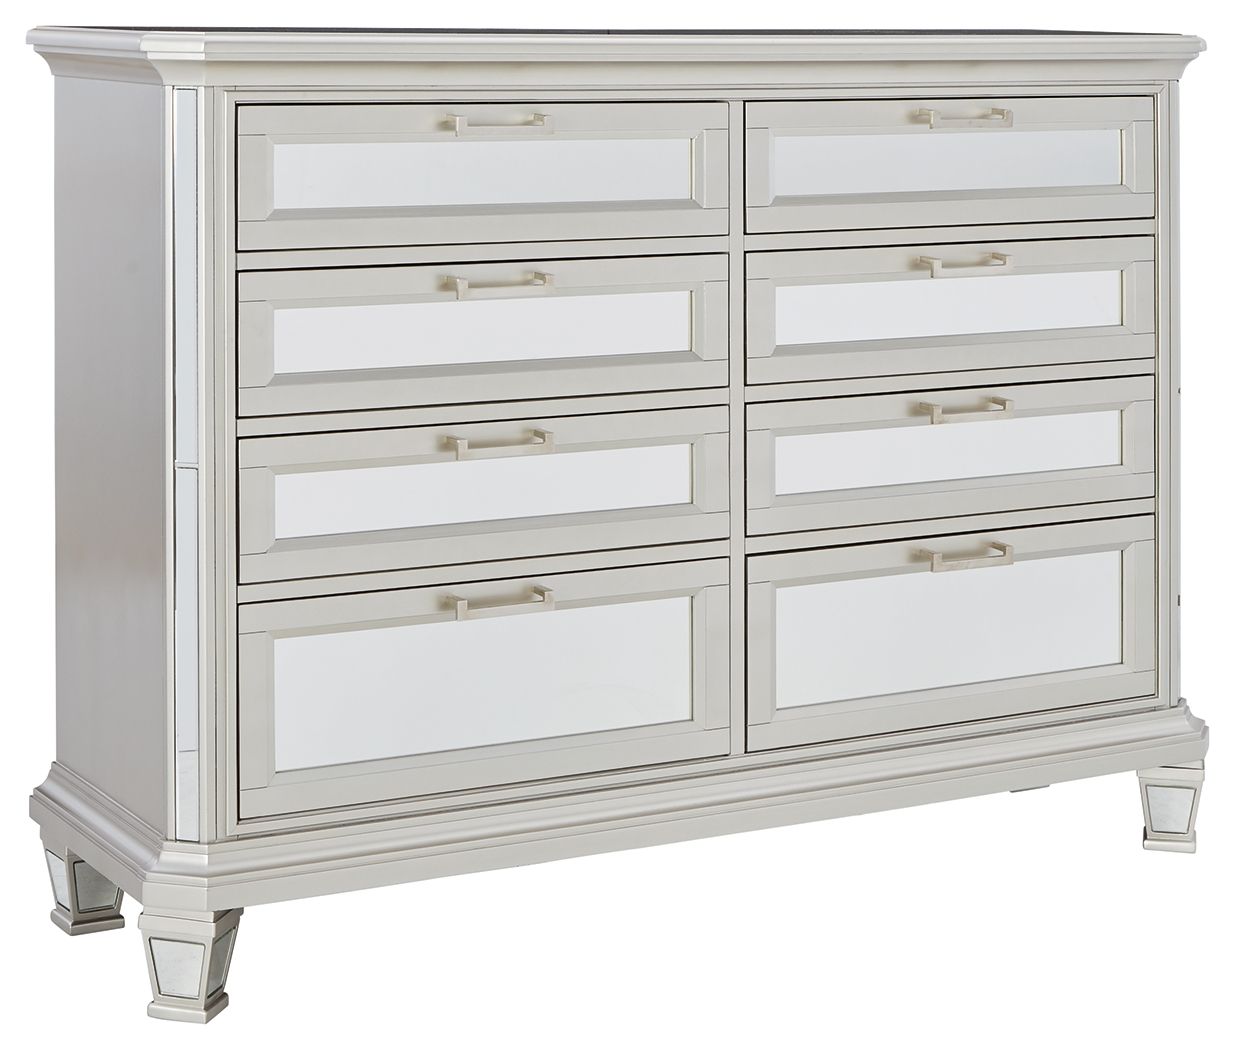 Lindenfield - Dresser - Tony's Home Furnishings